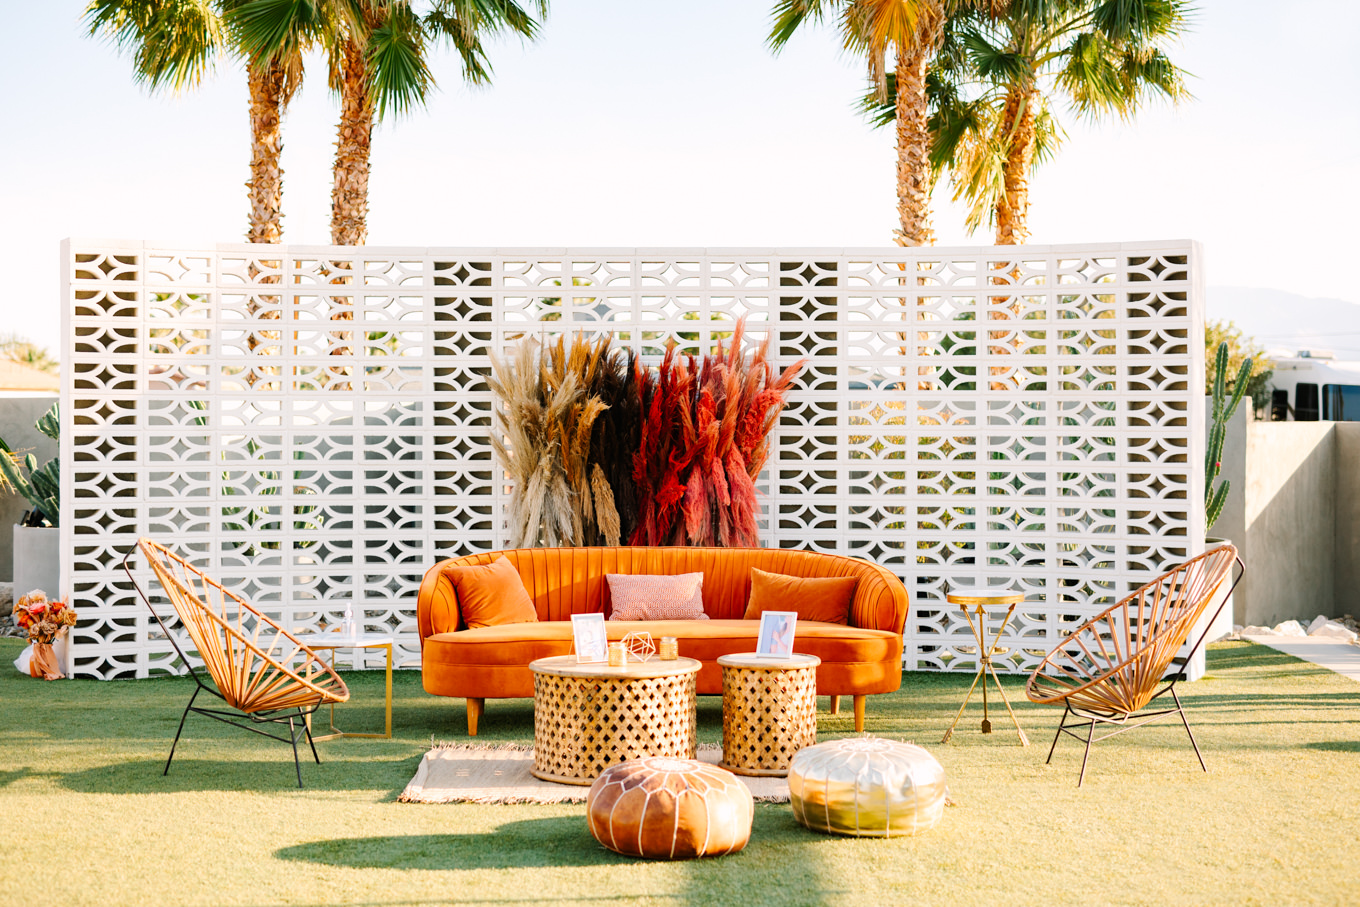 Lounge setup with orange velvet couch | Pink and orange Lautner Compound wedding | Colorful Palm Springs wedding photography | #palmspringsphotographer #palmspringswedding #lautnercompound #southerncaliforniawedding  Source: Mary Costa Photography | Los Angeles